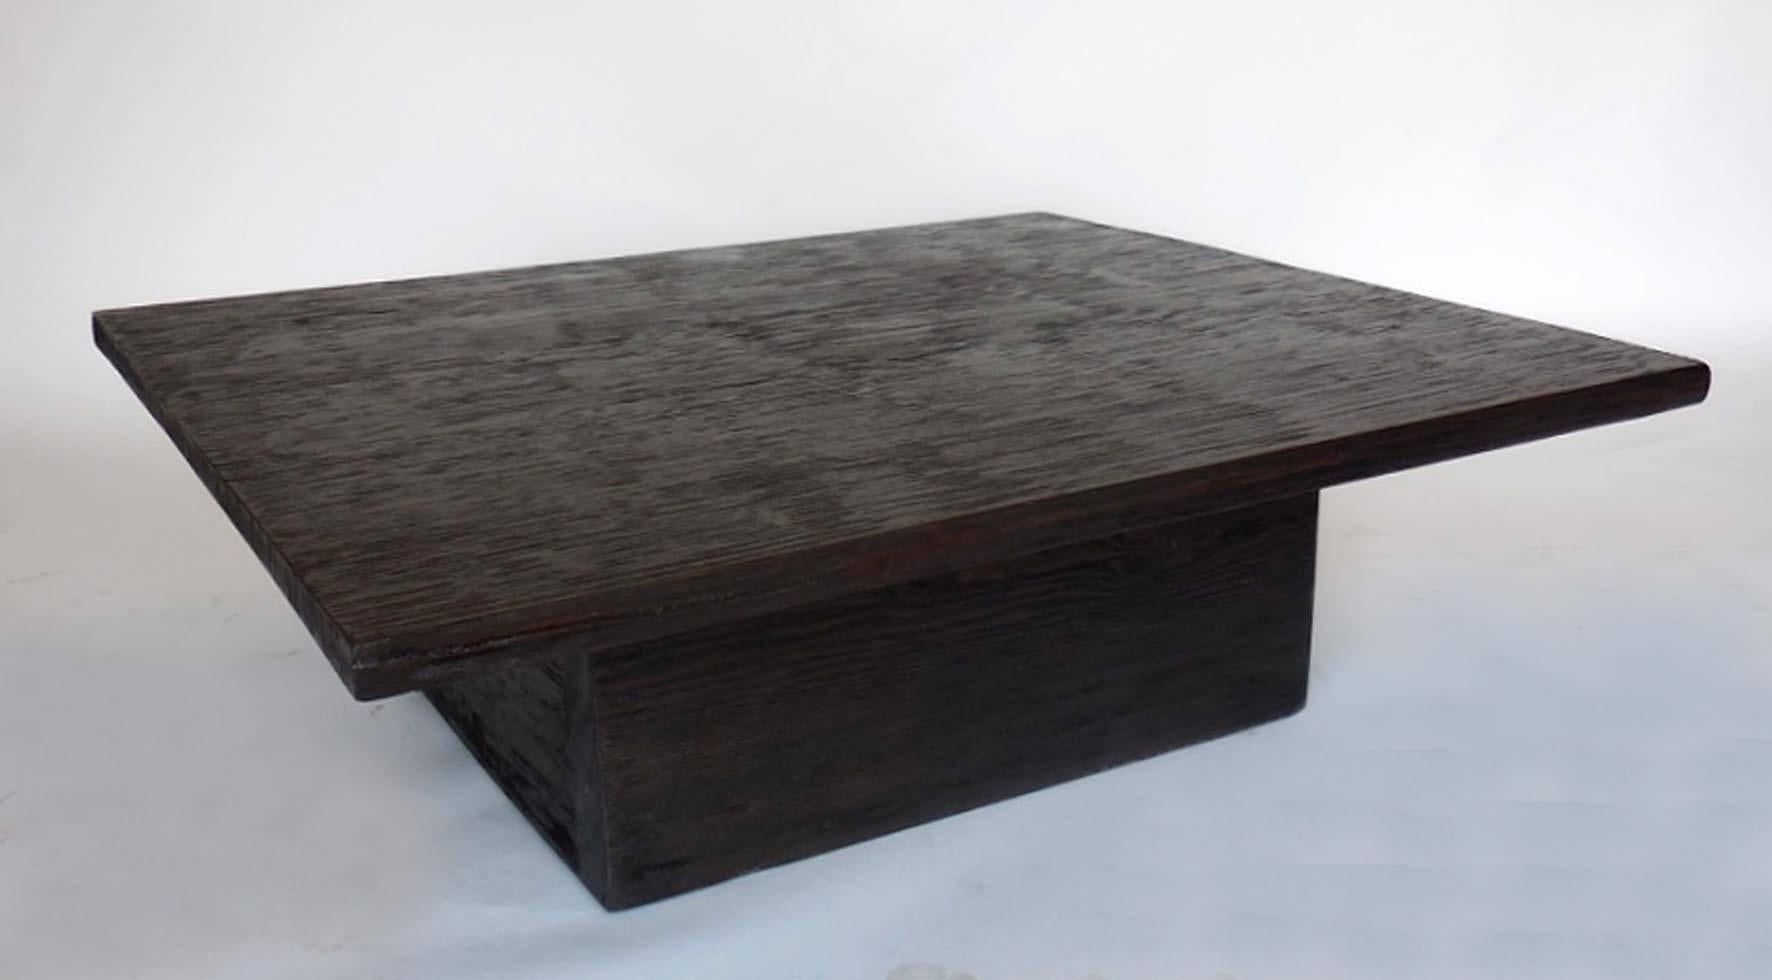 Dos Gallos Custom Wood Cube Coffee Table in Espresso Finish In Excellent Condition For Sale In Los Angeles, CA